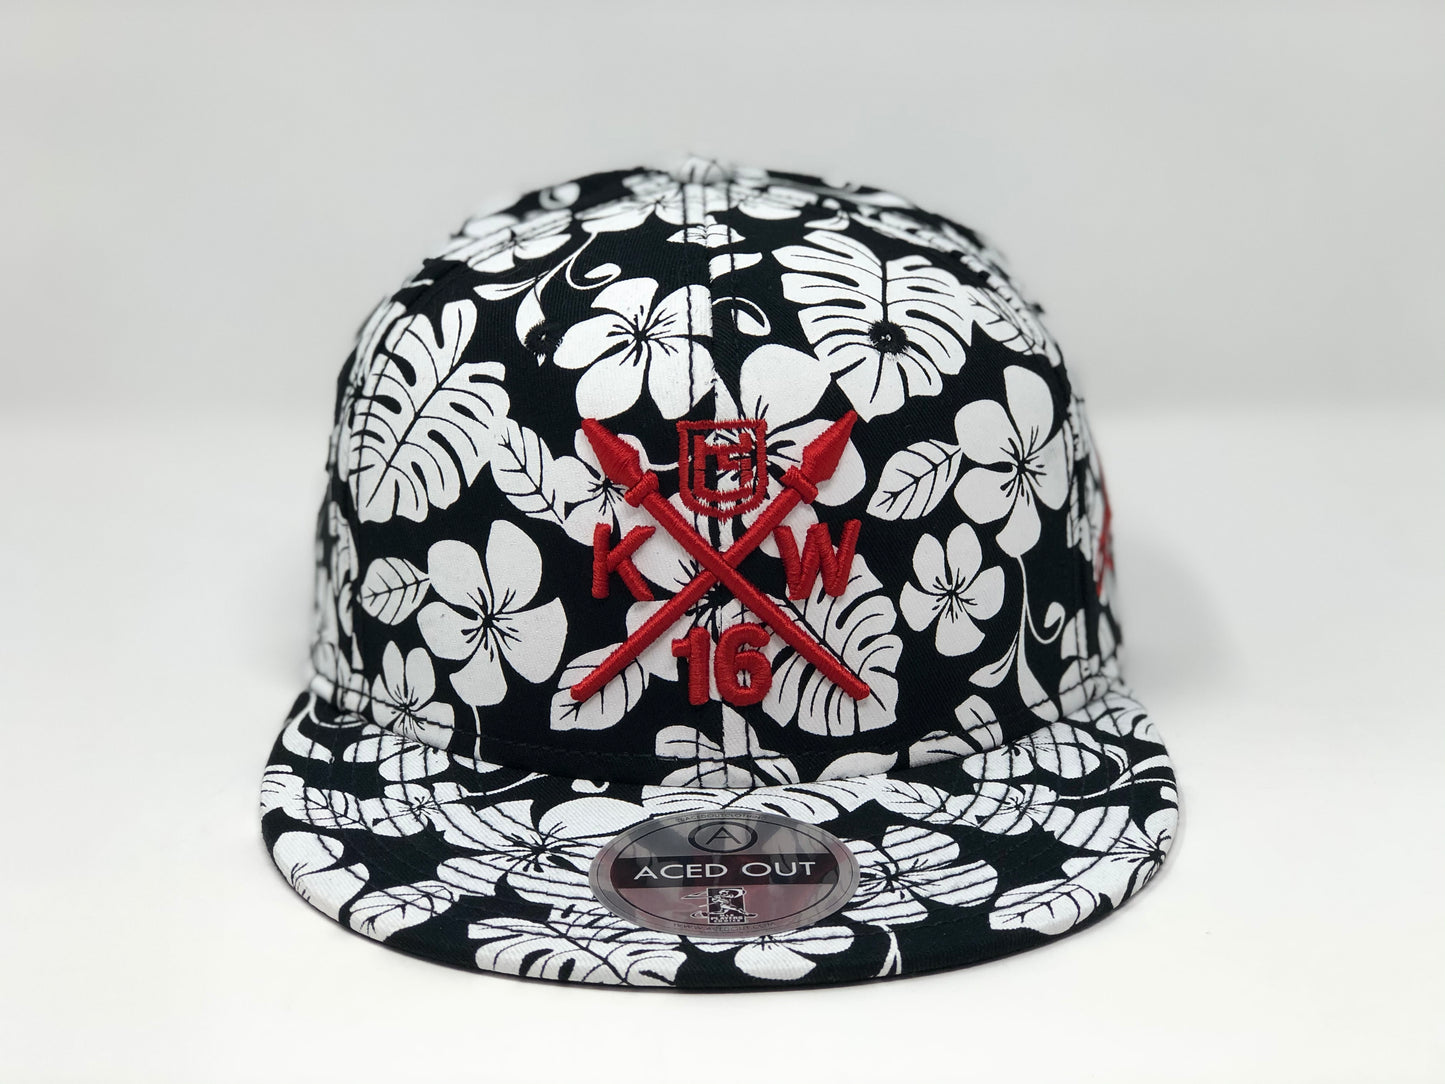 Kolten Wong KW16 Red Compass Hat - Black/White Aloha Snapback - Limited Edition of 16